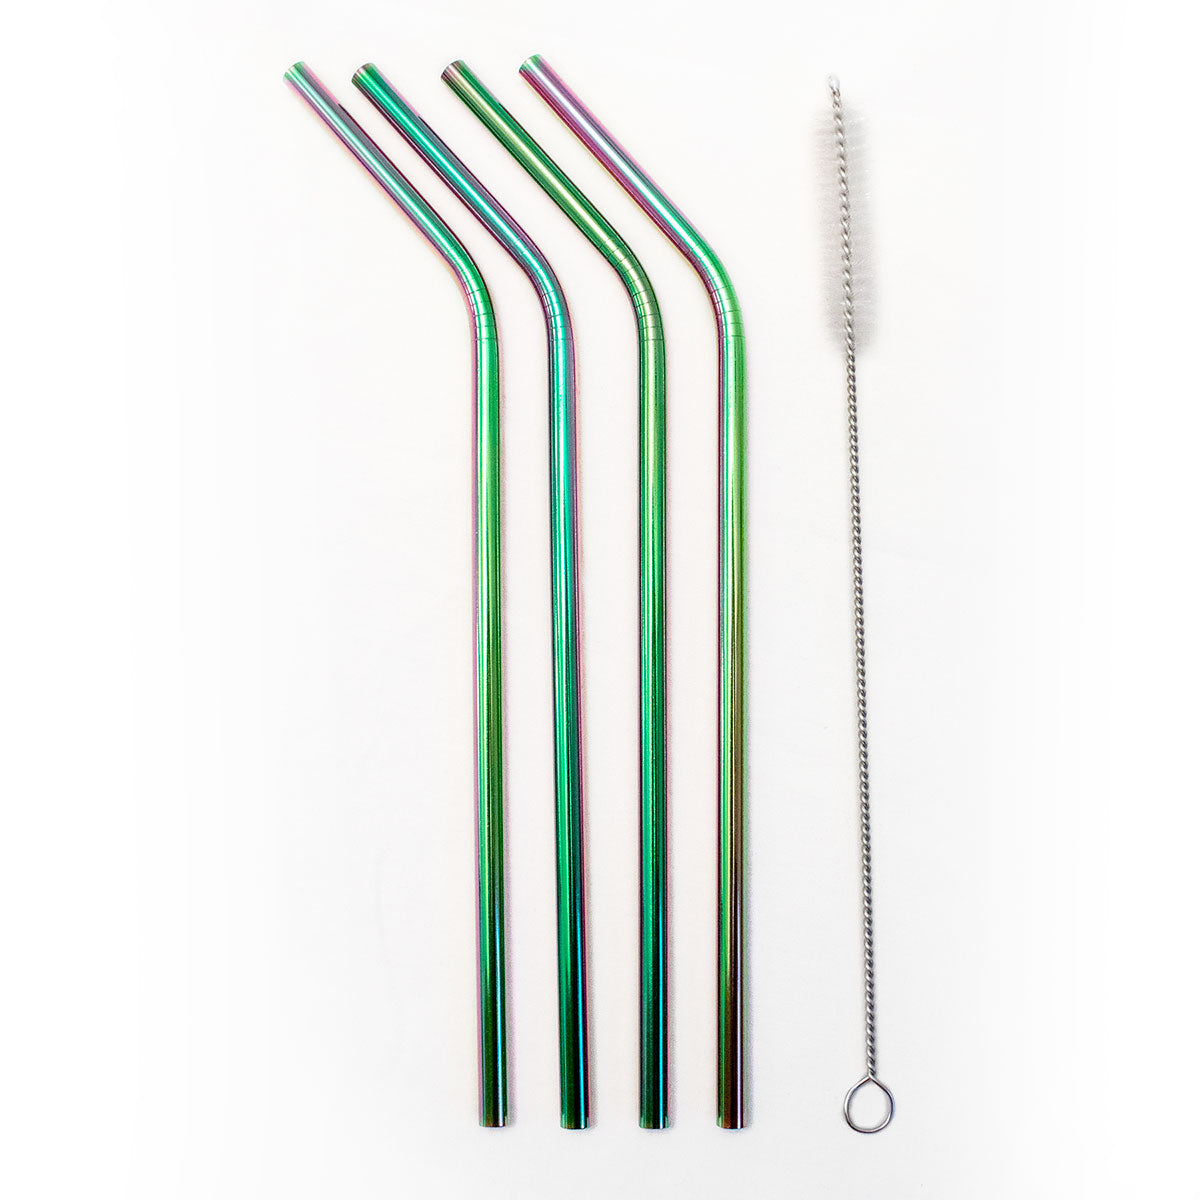 4 Stainless Steel Reusable Drinking Straws + Brush + Pouch, Drinking Straws, HEED THE HUM